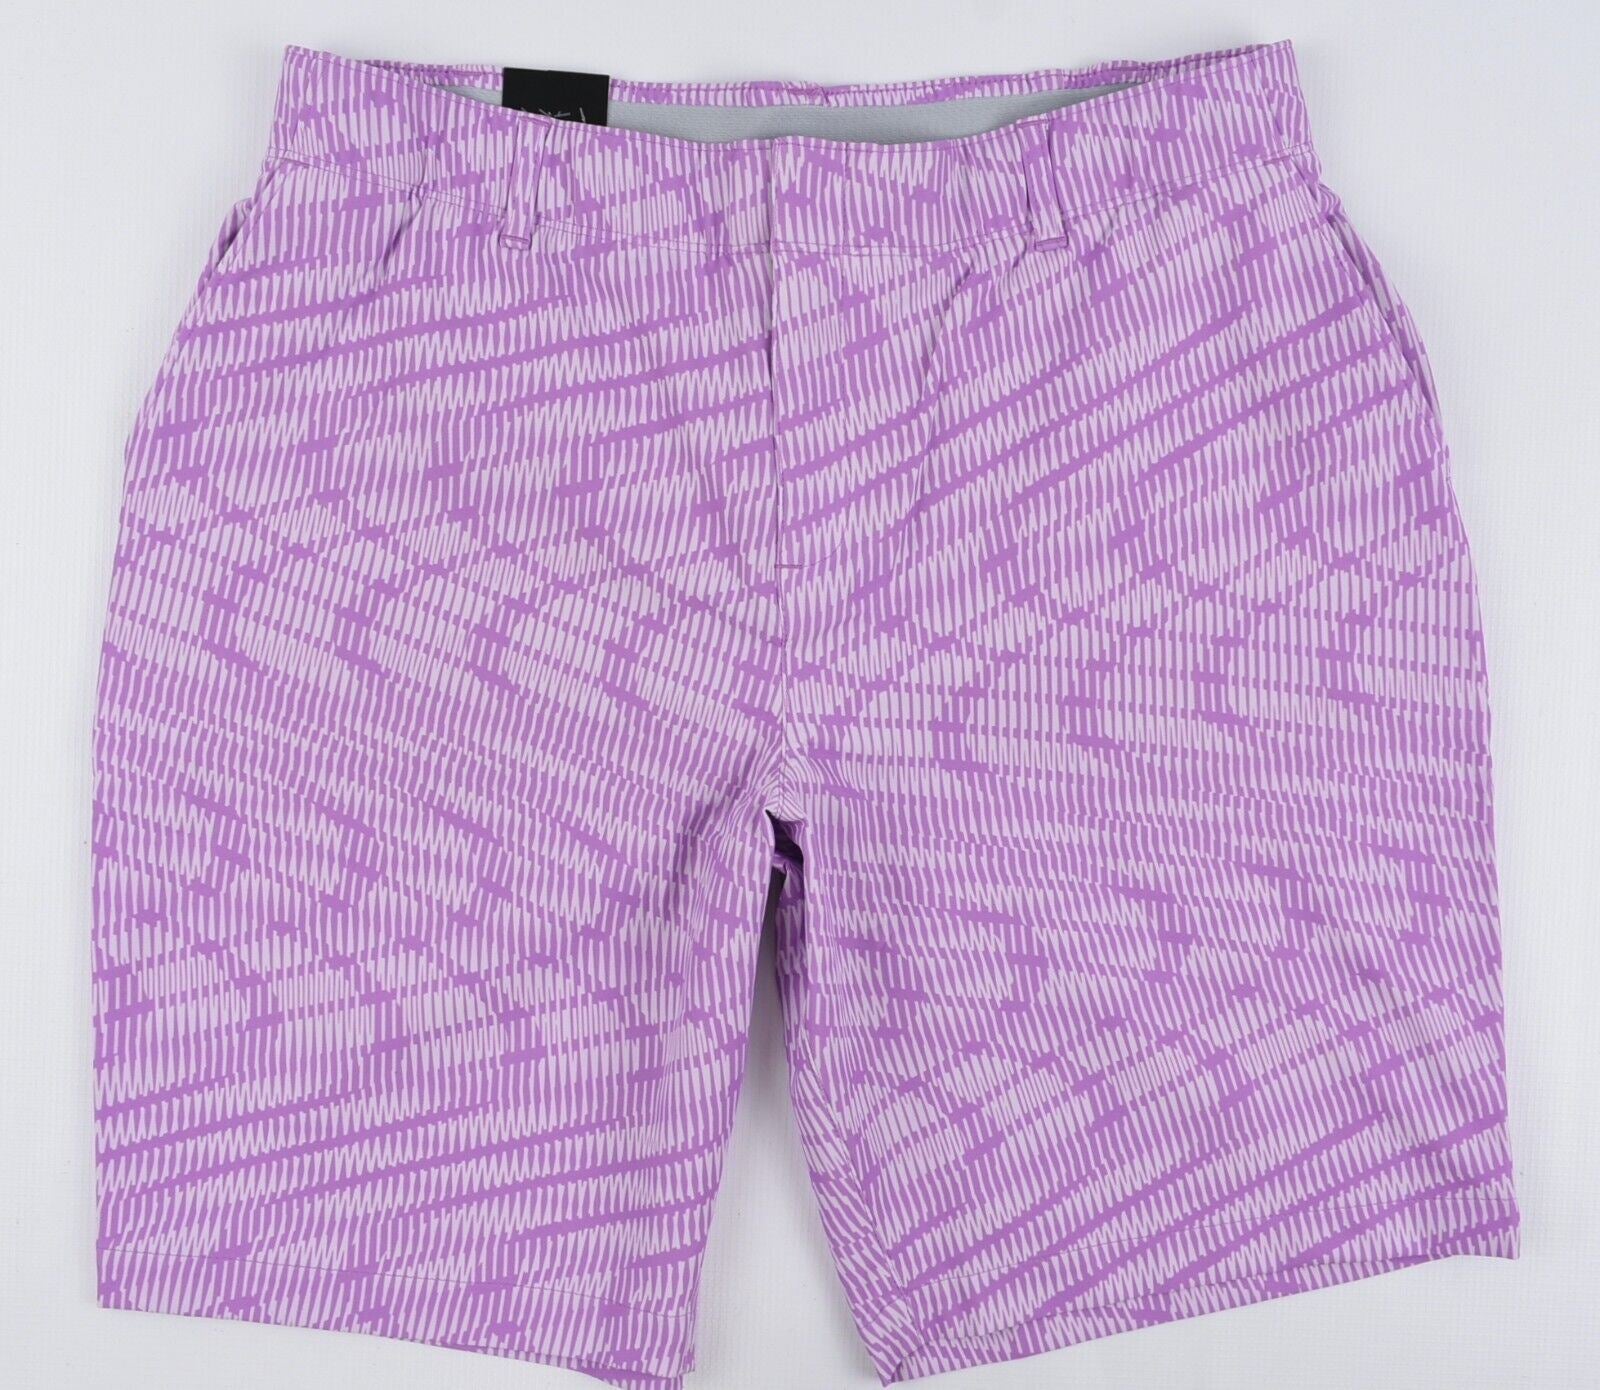 UNDER ARMOUR GOLF Women's 9" Shorts, Purple/Printed, size S (UK 10)